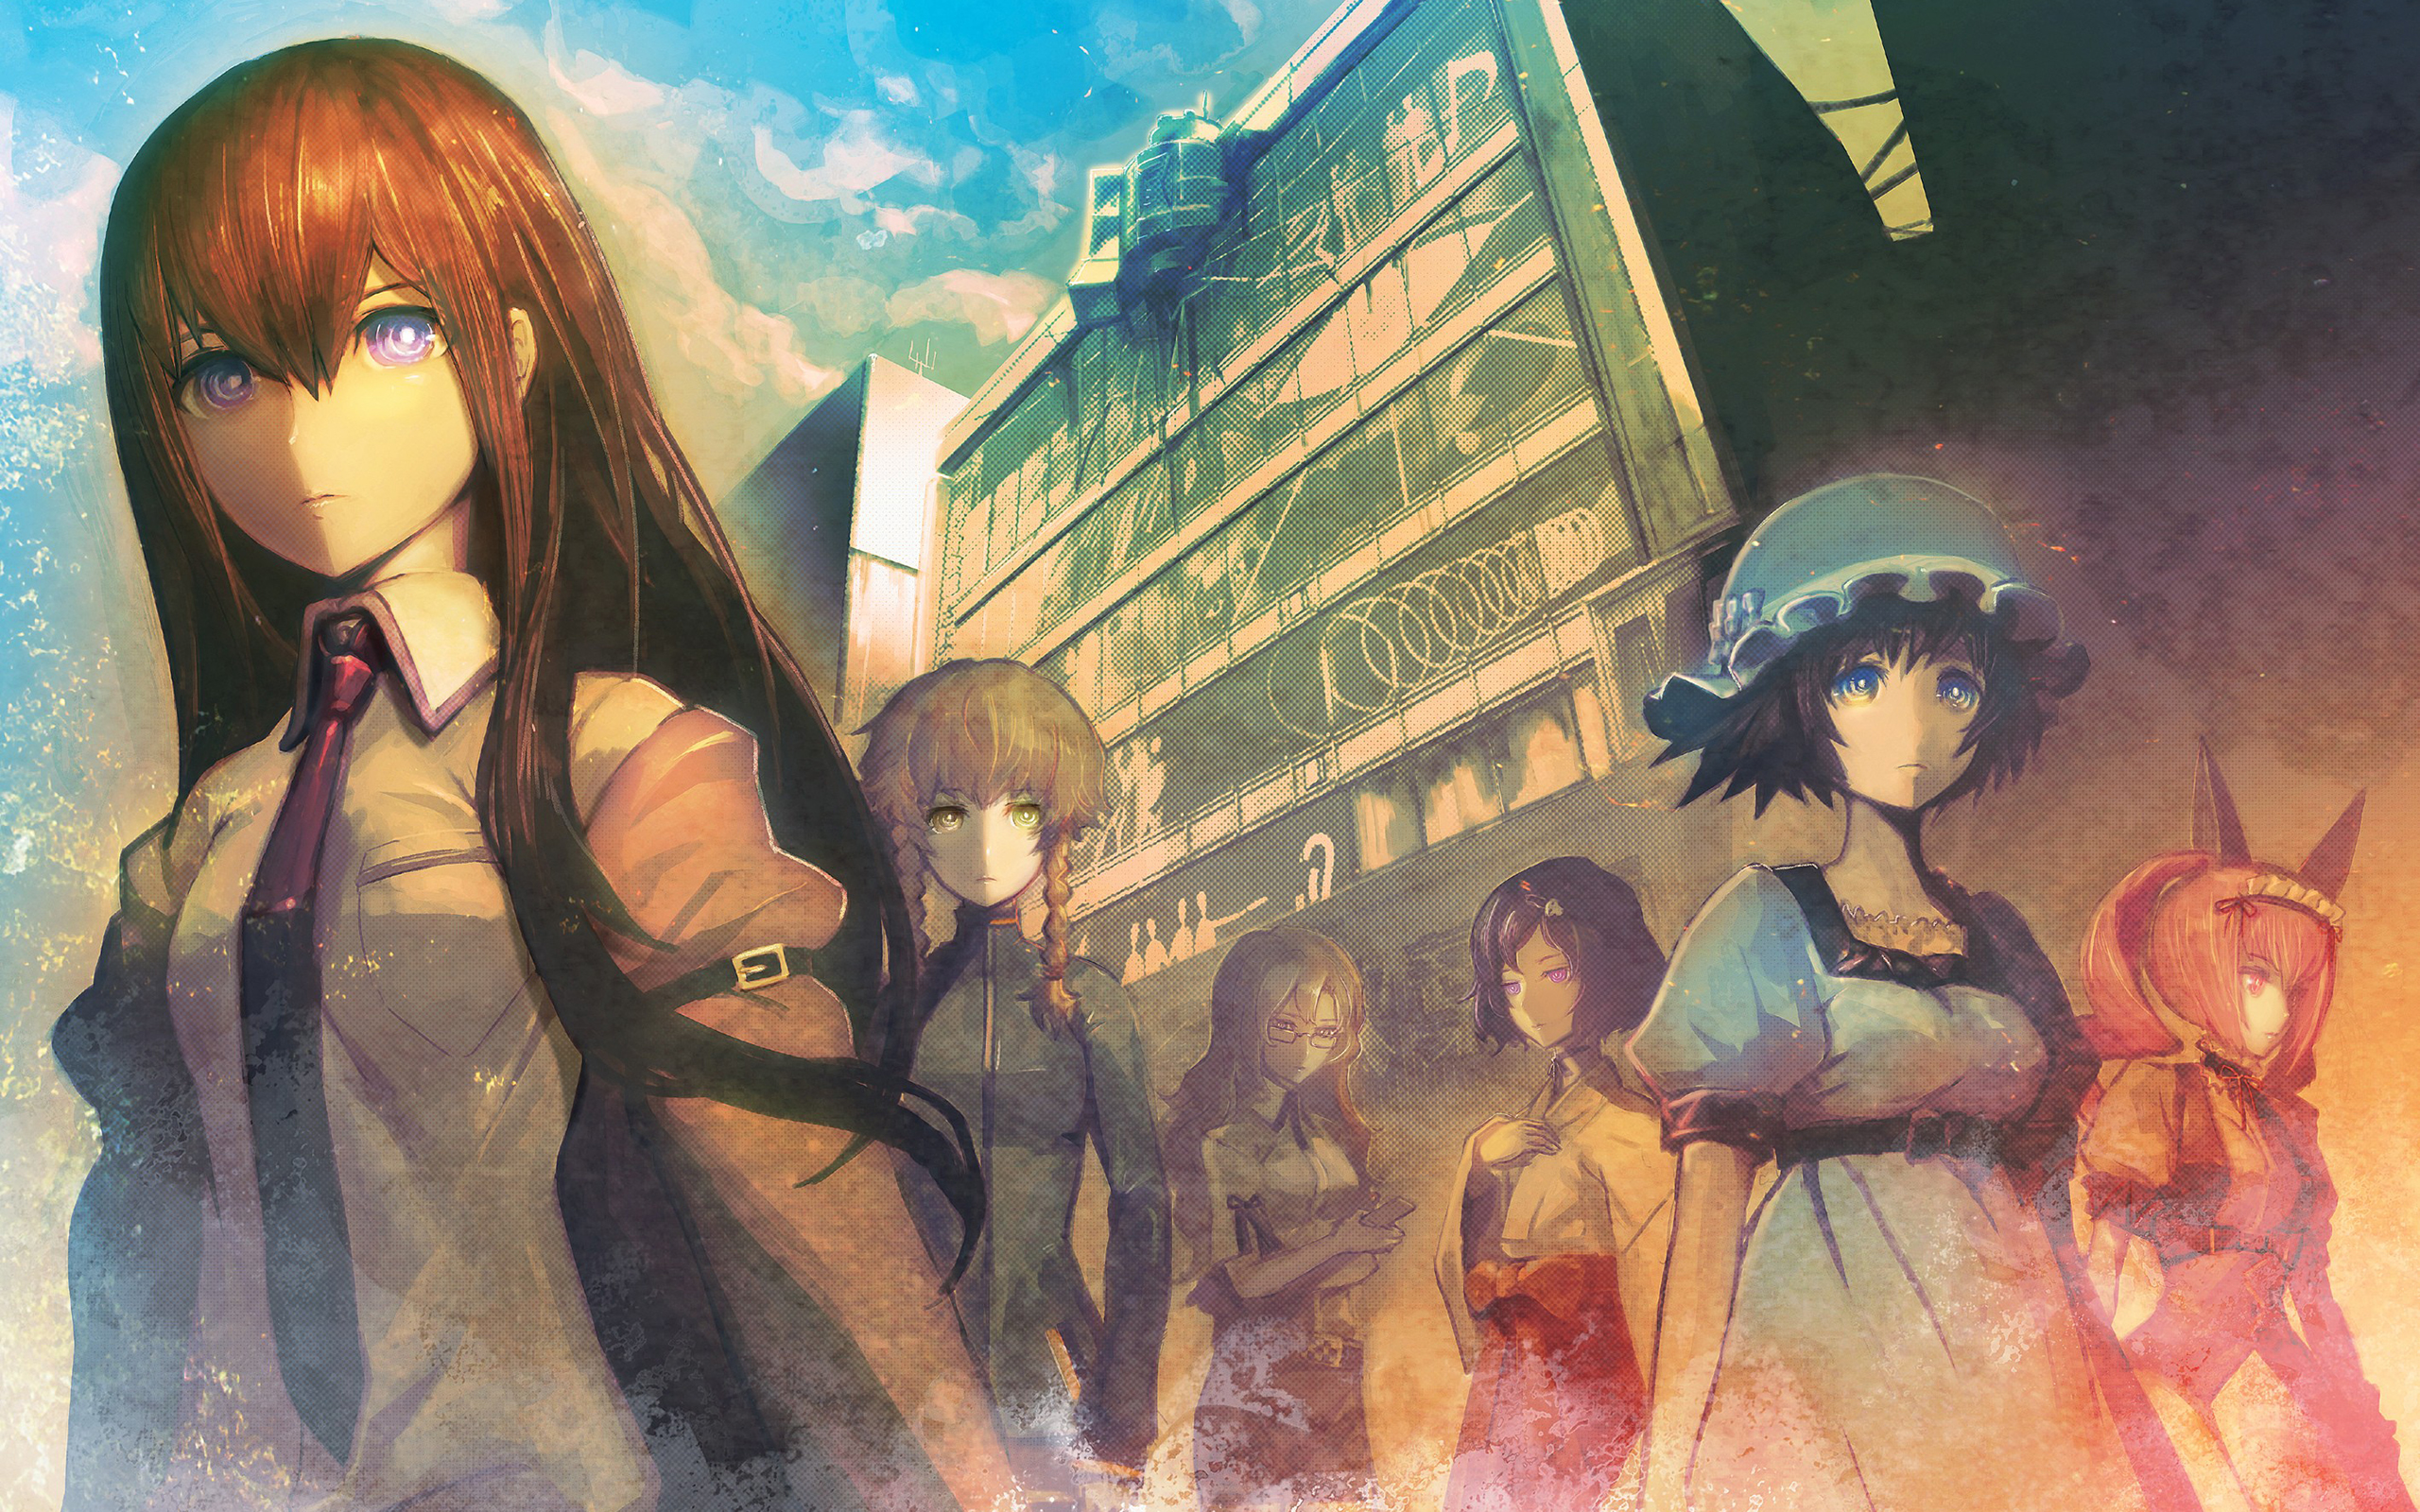 Free Download Steinsgate Computer Wallpapers Desktop Backgrounds 2560x1600 Id 2560x1600 For Your Desktop Mobile Tablet Explore 50 Steins Gate Wallpaper Iphone Steins Gate Wallpaper 1080p Steins Gate Wallpaper Hd